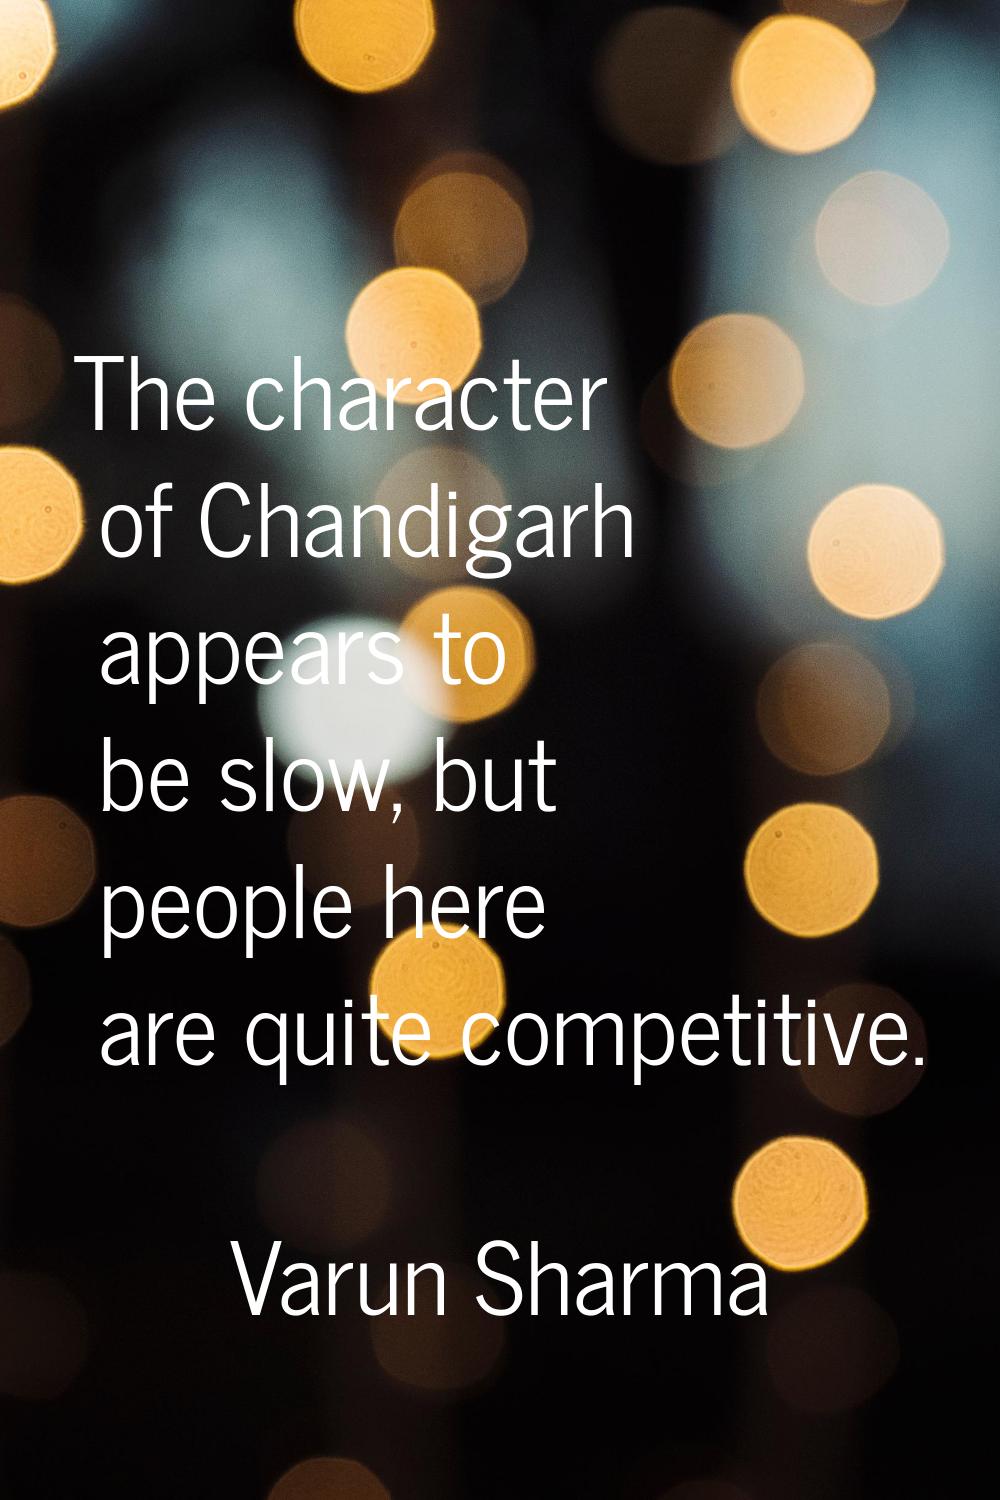 The character of Chandigarh appears to be slow, but people here are quite competitive.